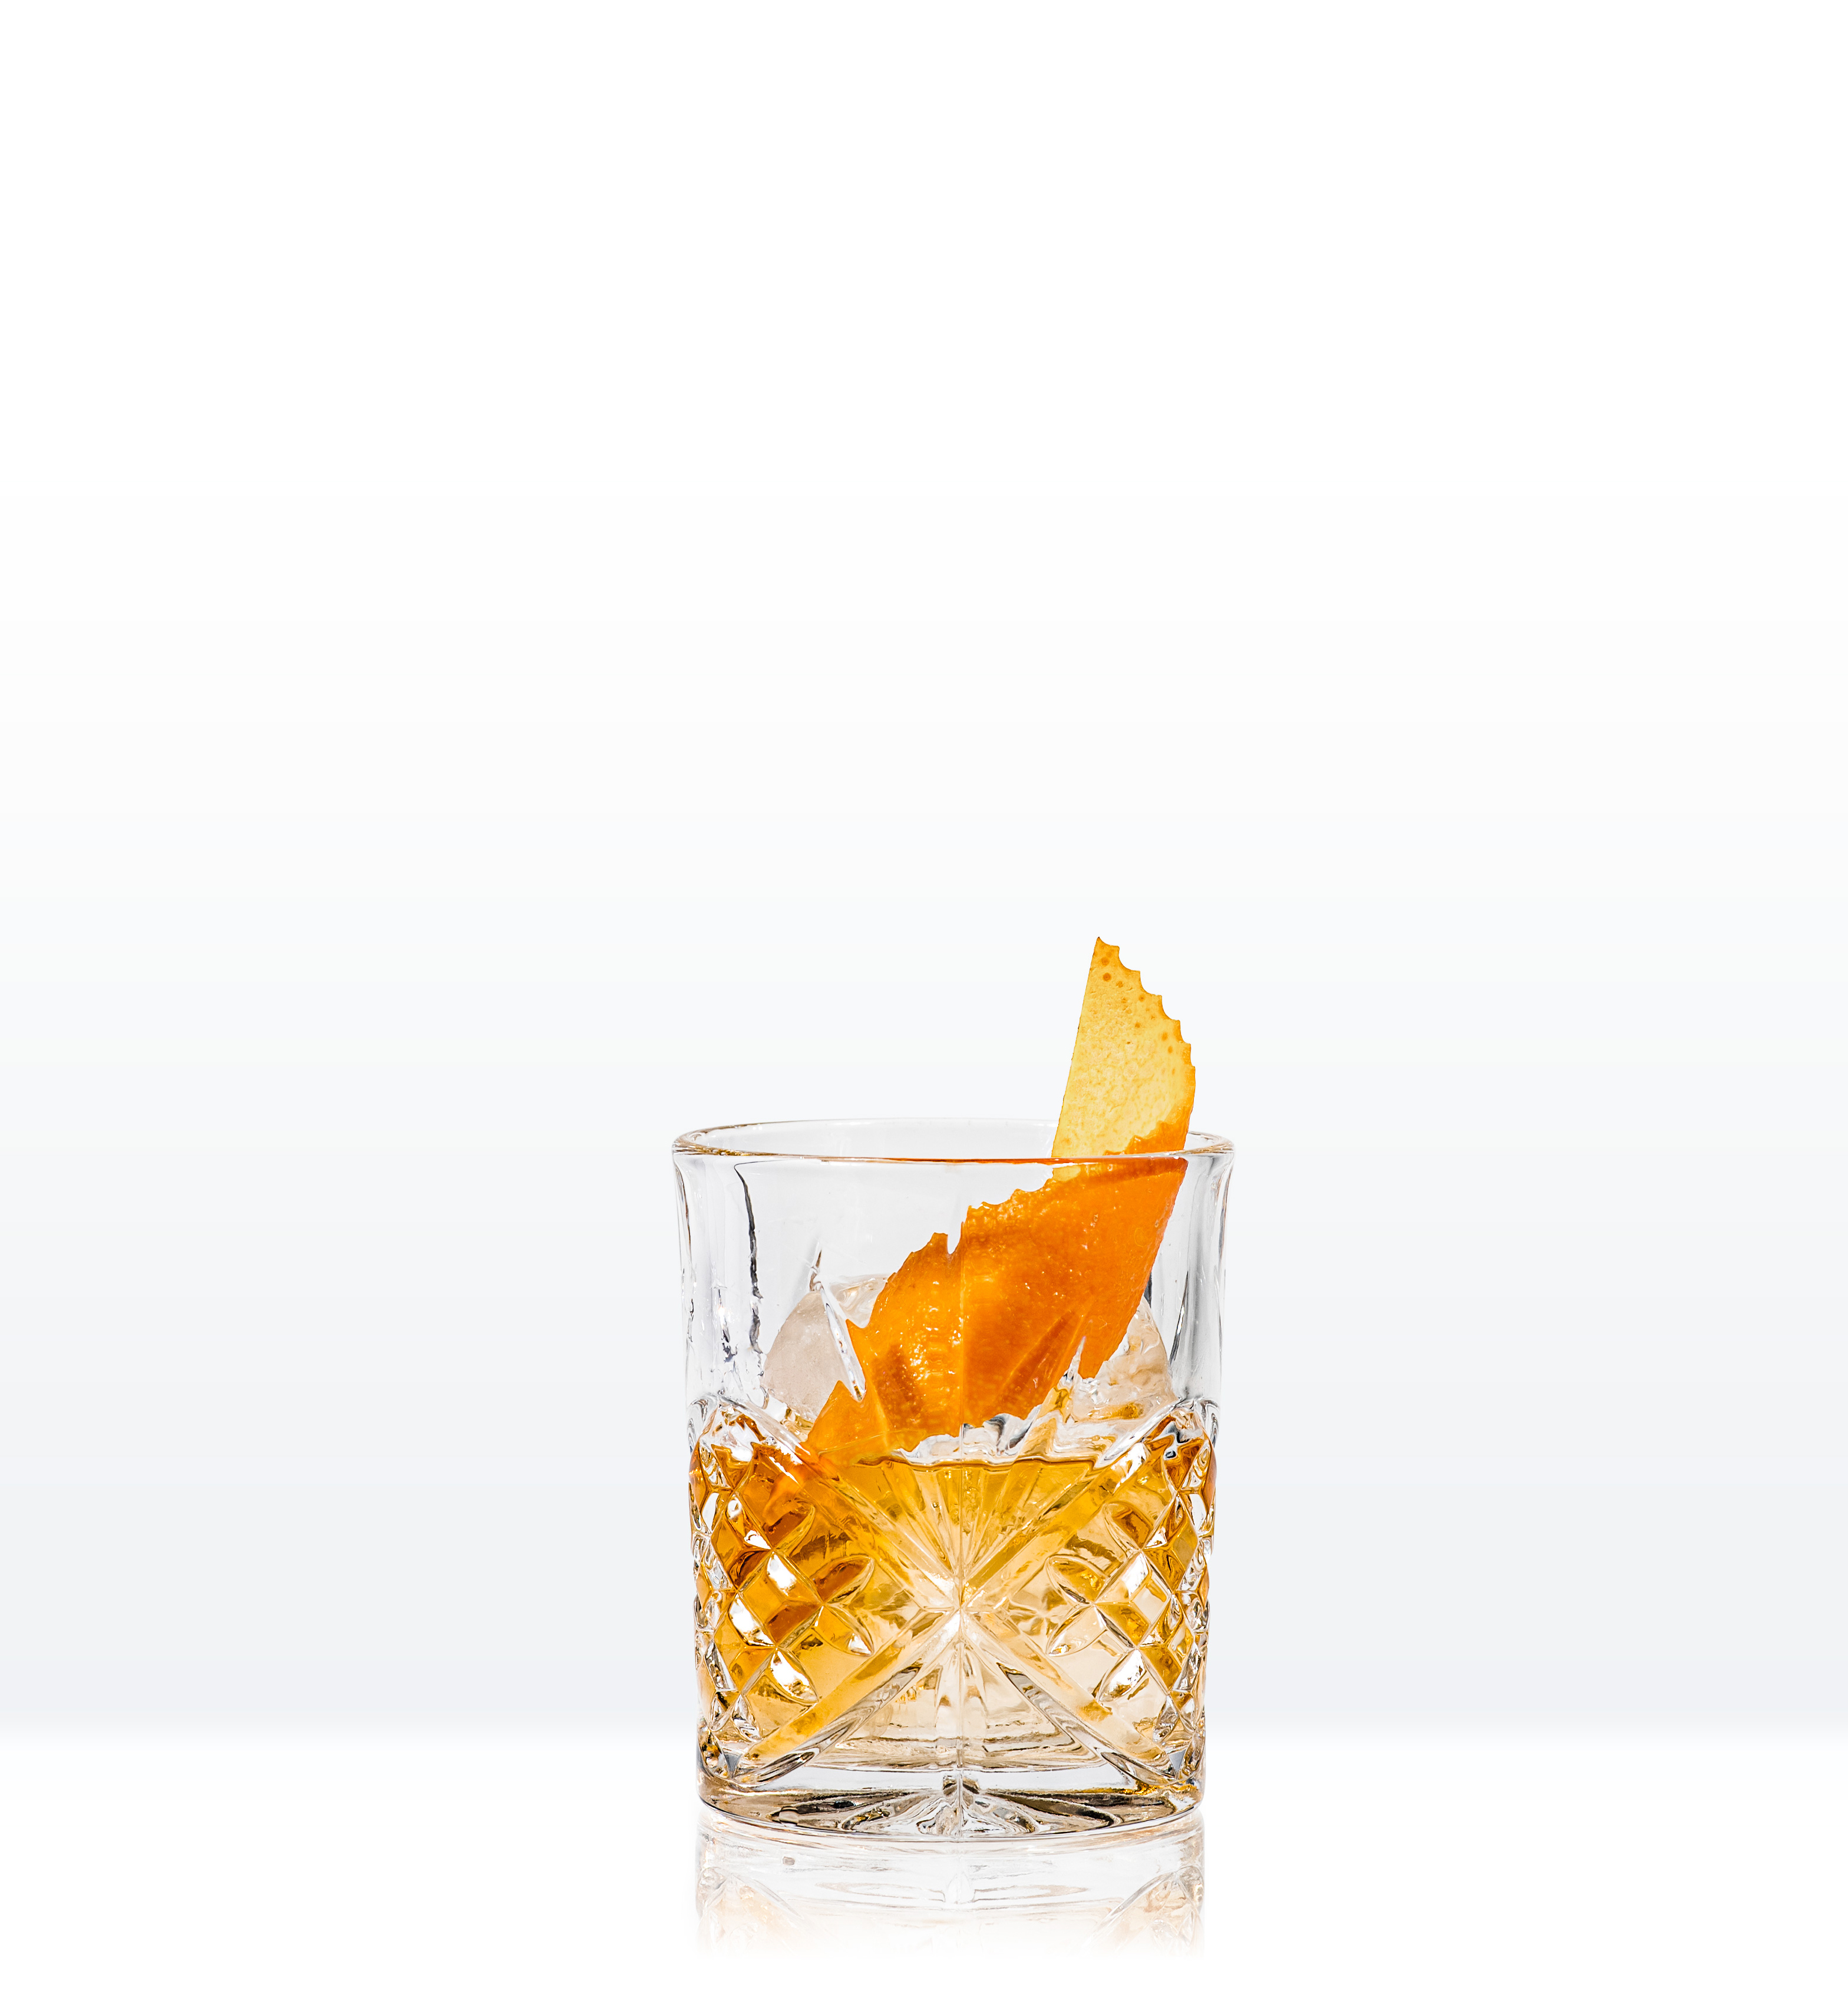 Whiskey cocktail in crystal lowball glass garnished with orange twist